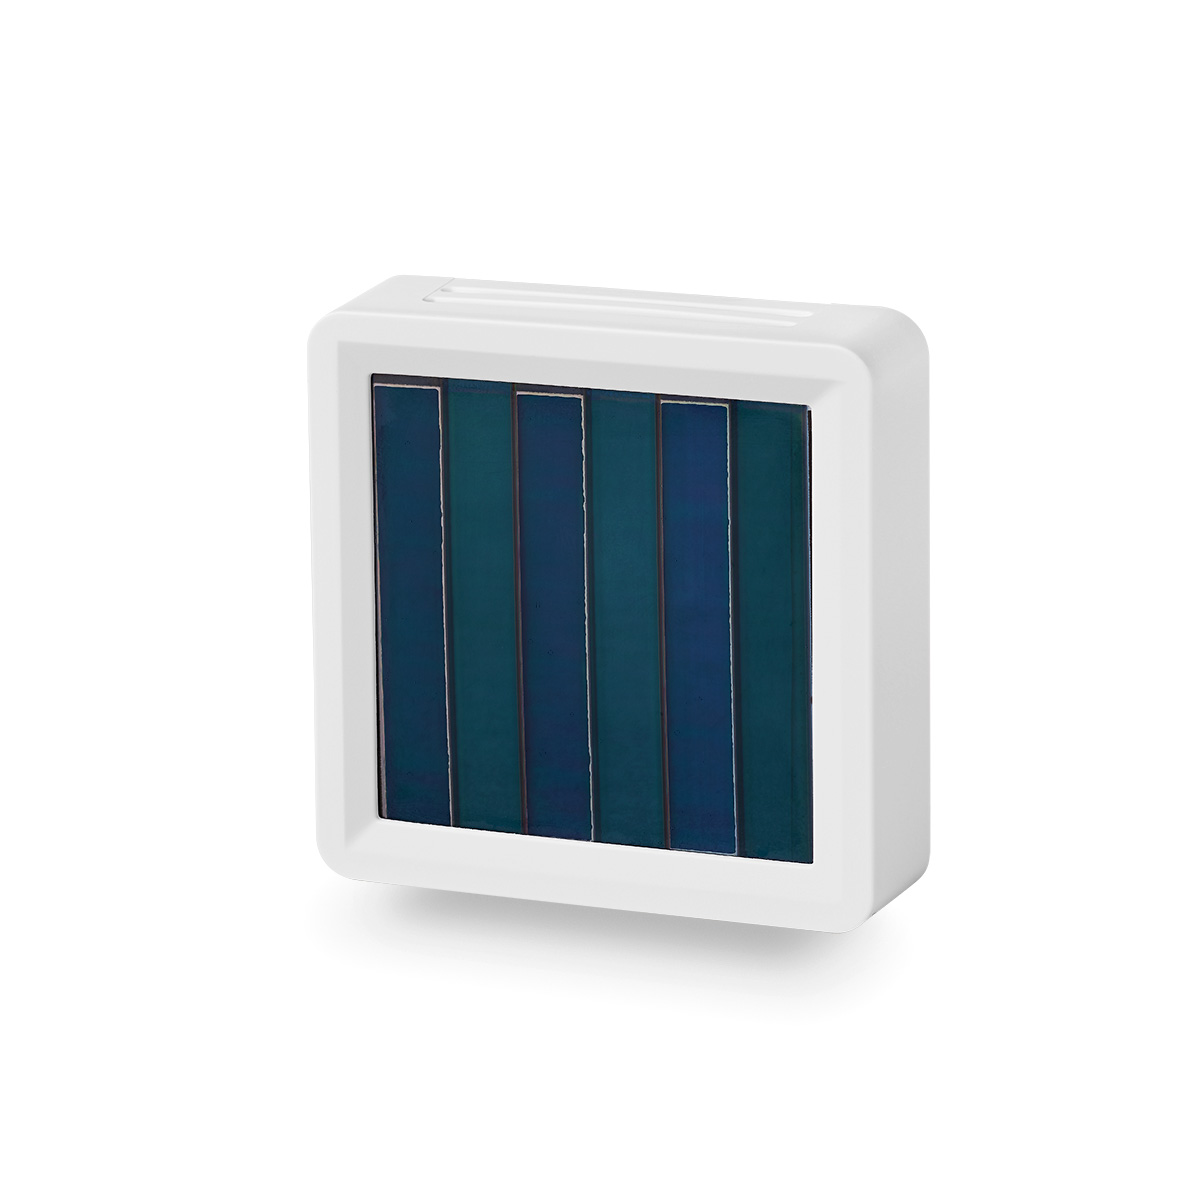 Our product range widens with solar cell sensors!  